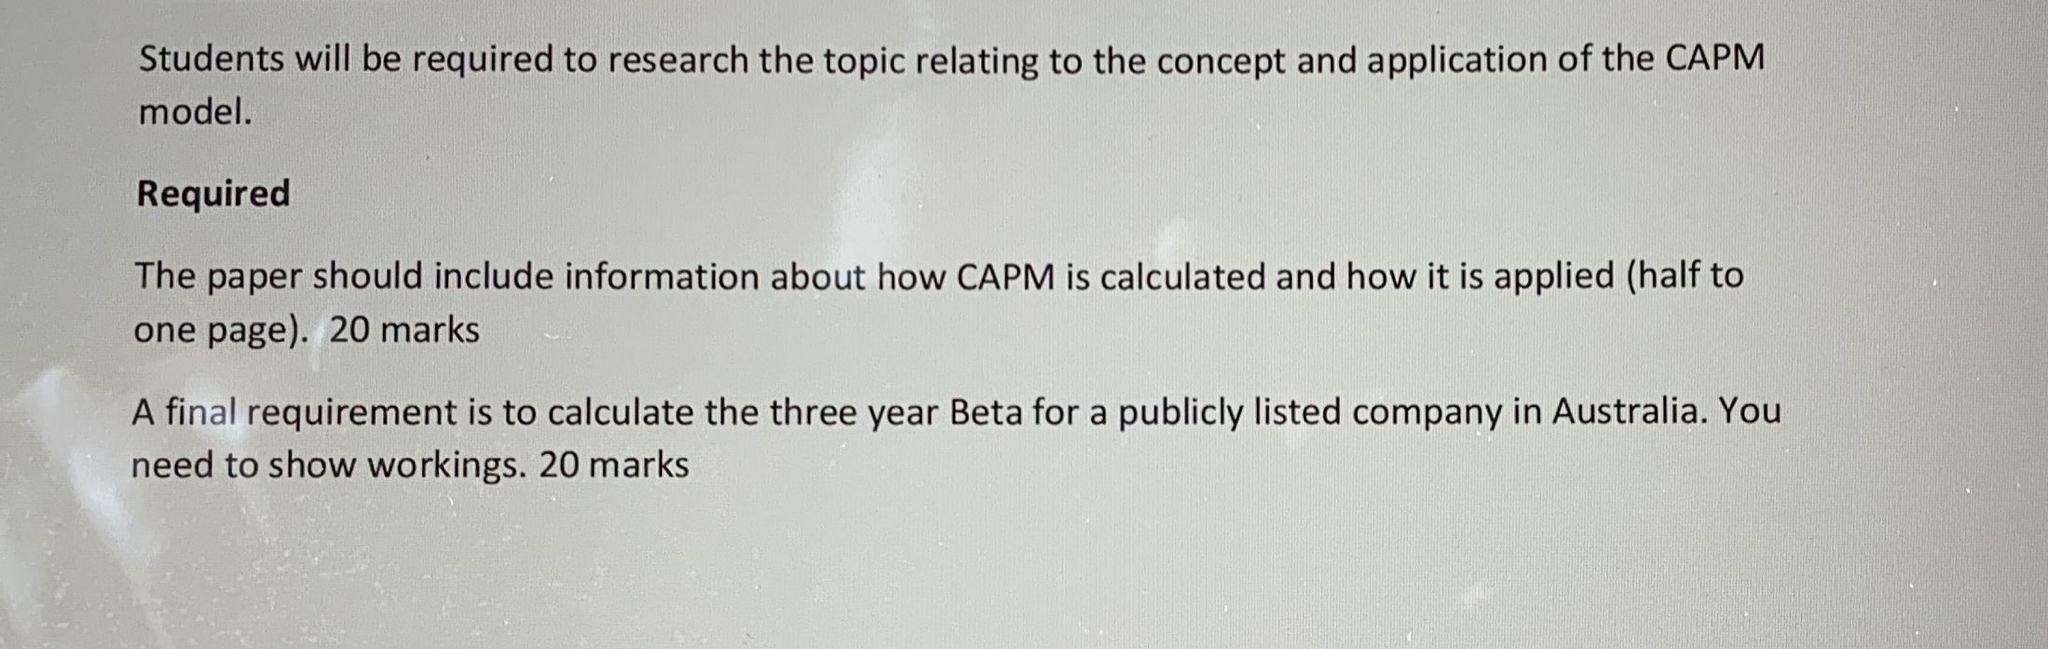 Students will be required to research the topic relating to the concept and application of the CAPM model.